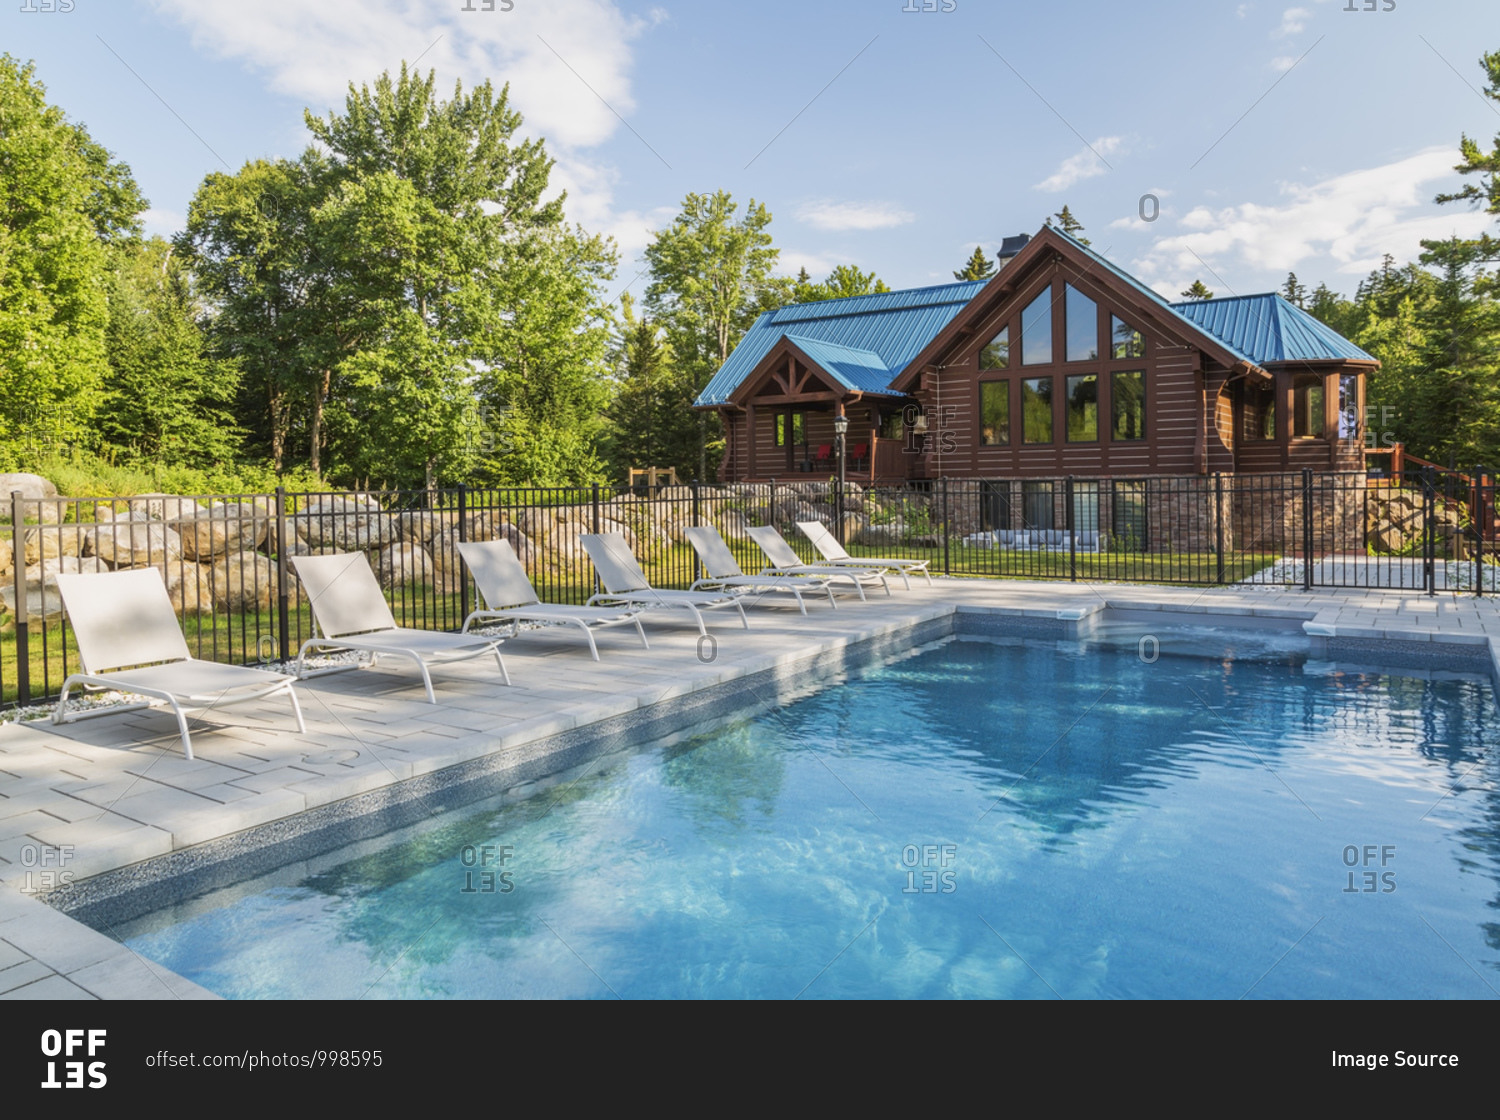 In-ground salt water swimming pool and brown stained milled Eastern white pine timber and flat log profile home facade with stone cladding on walk-out lower level and blue standing-seam sheet metal roof, Quebec, Canada